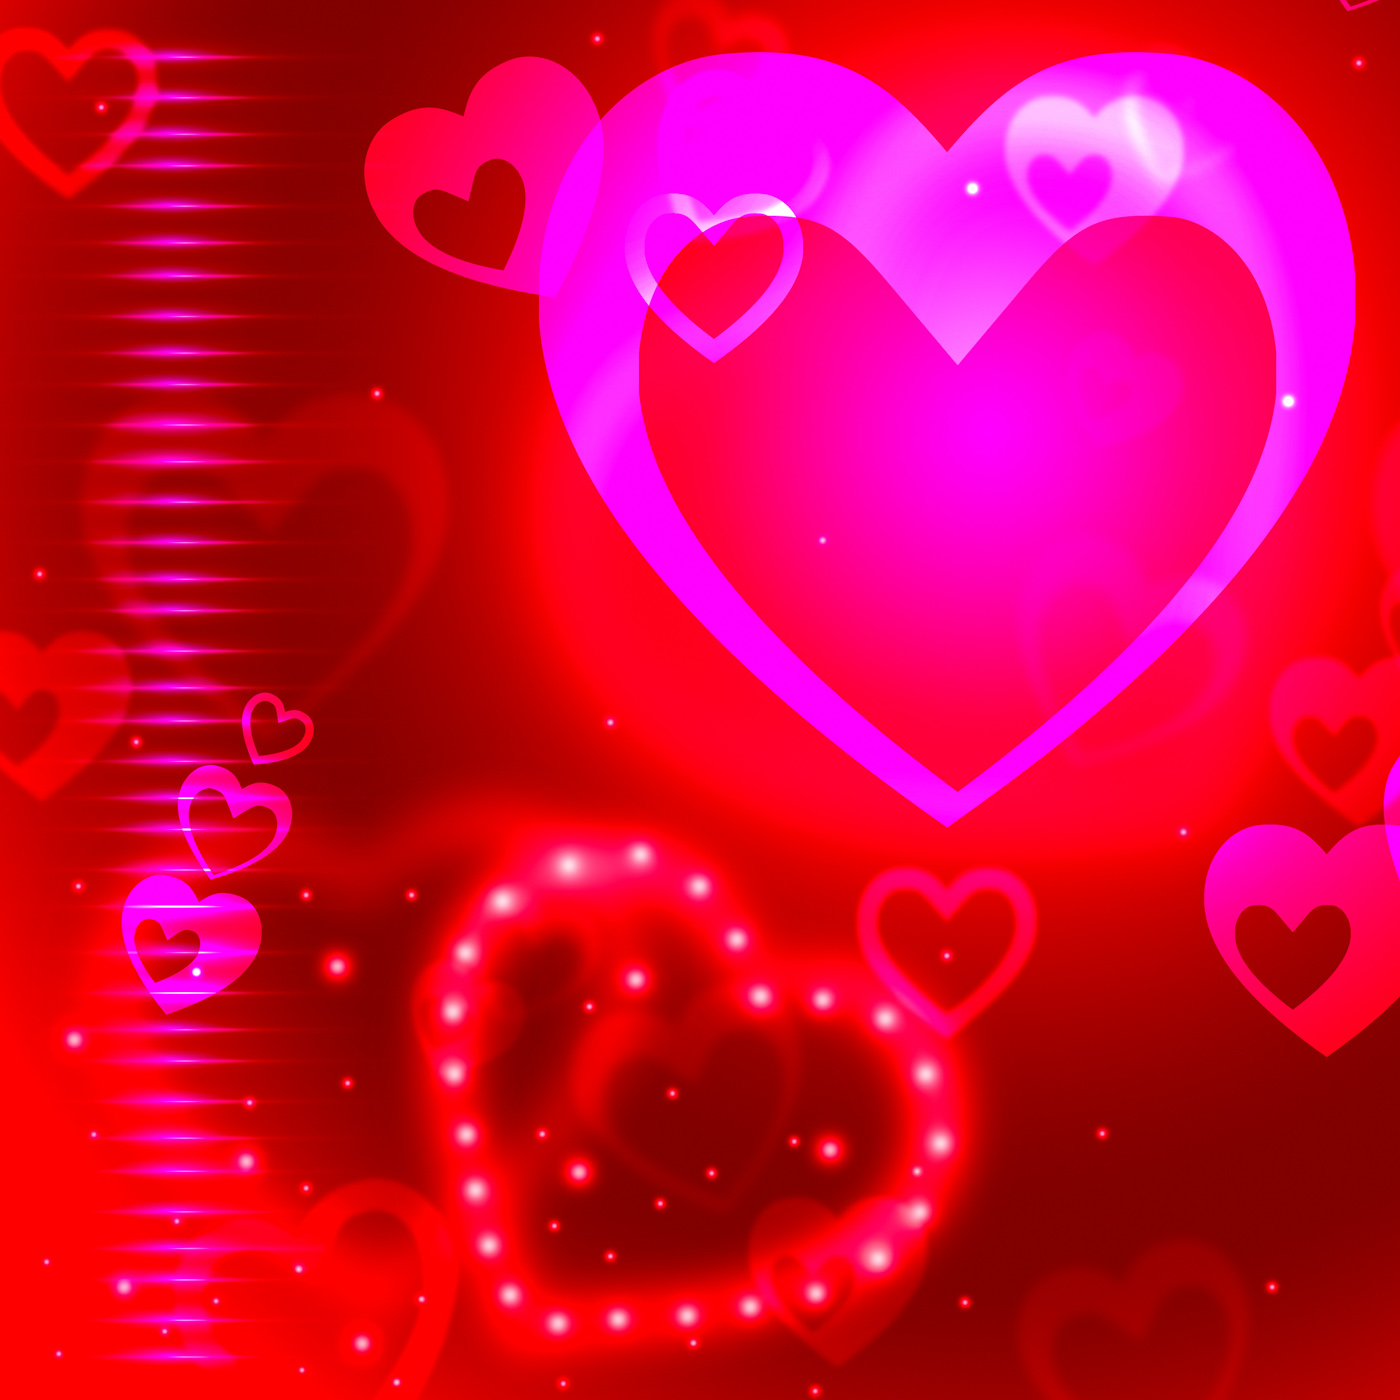 Glow background indicates valentine day and backgrounds photo